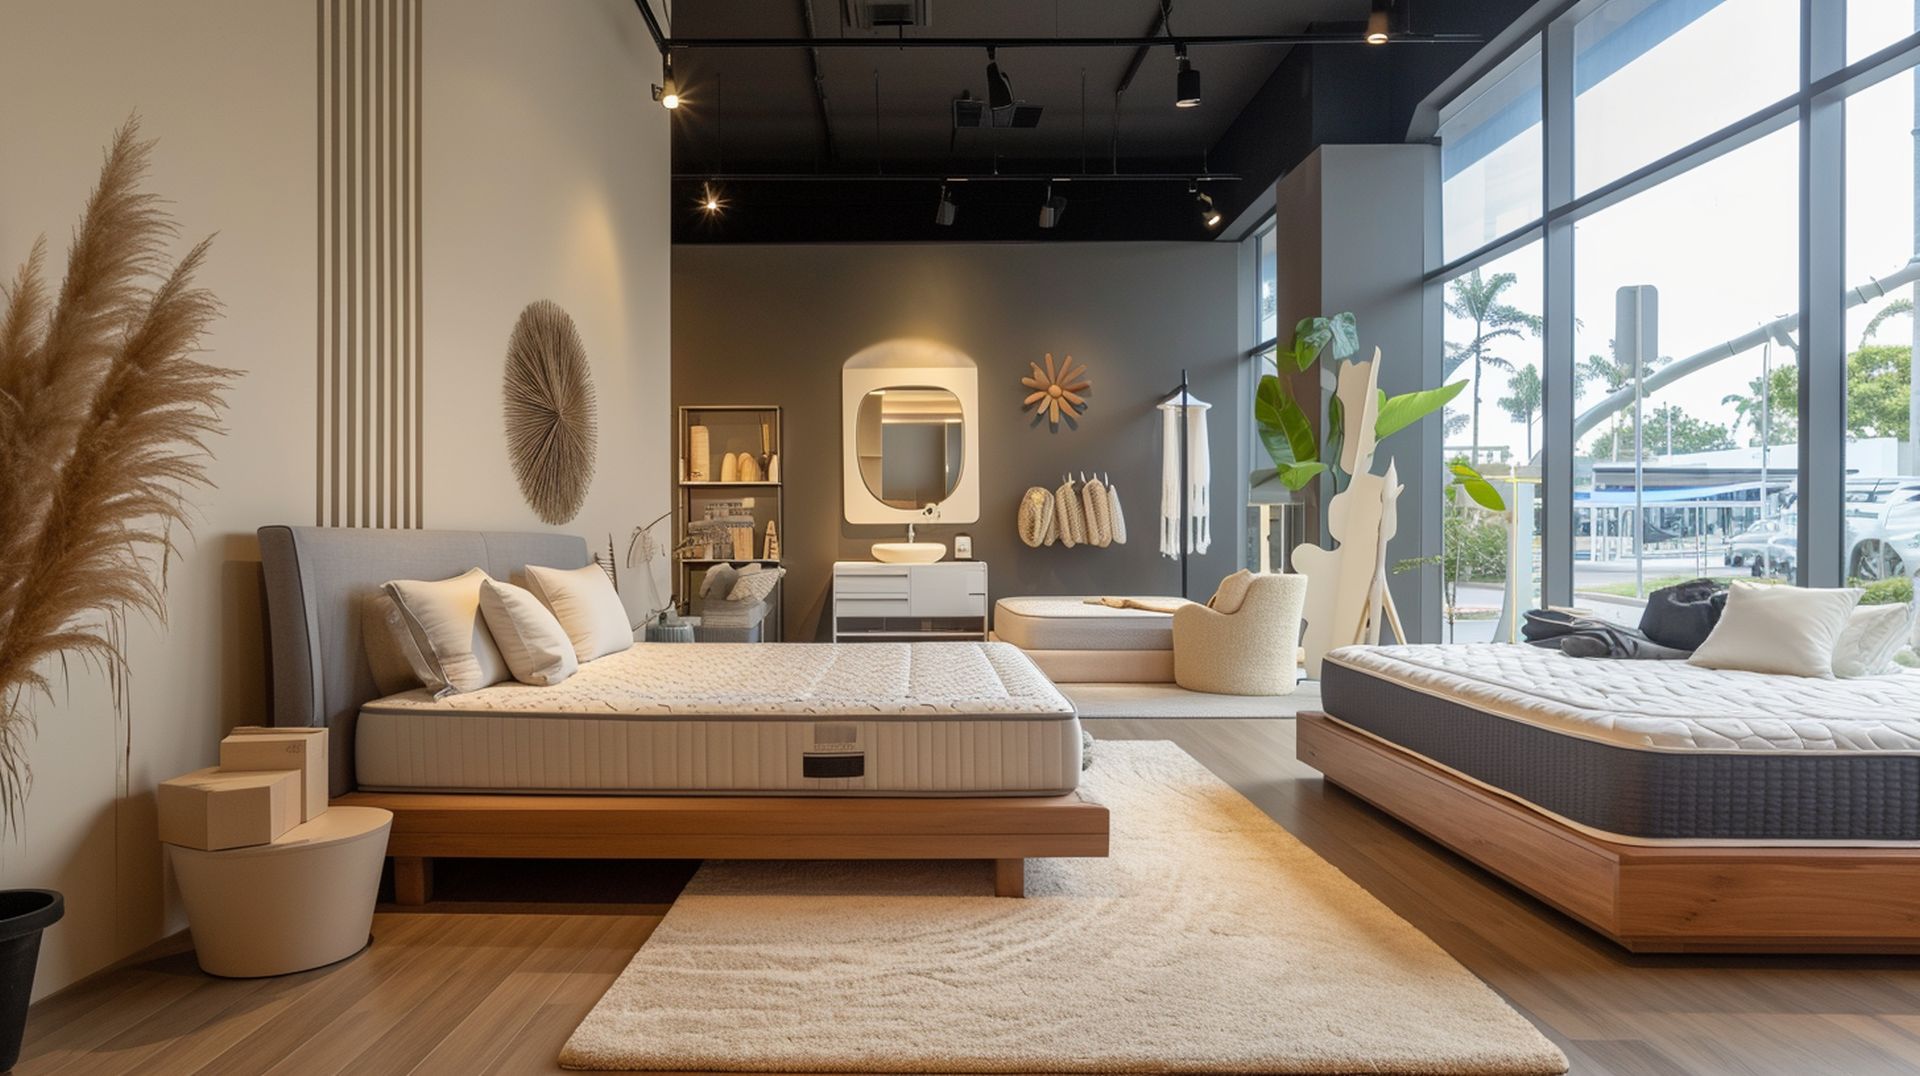 If you're looking for a new bed, mattress stores in Orlando offer the best customer and delivery service, financing, and warranties in Florida